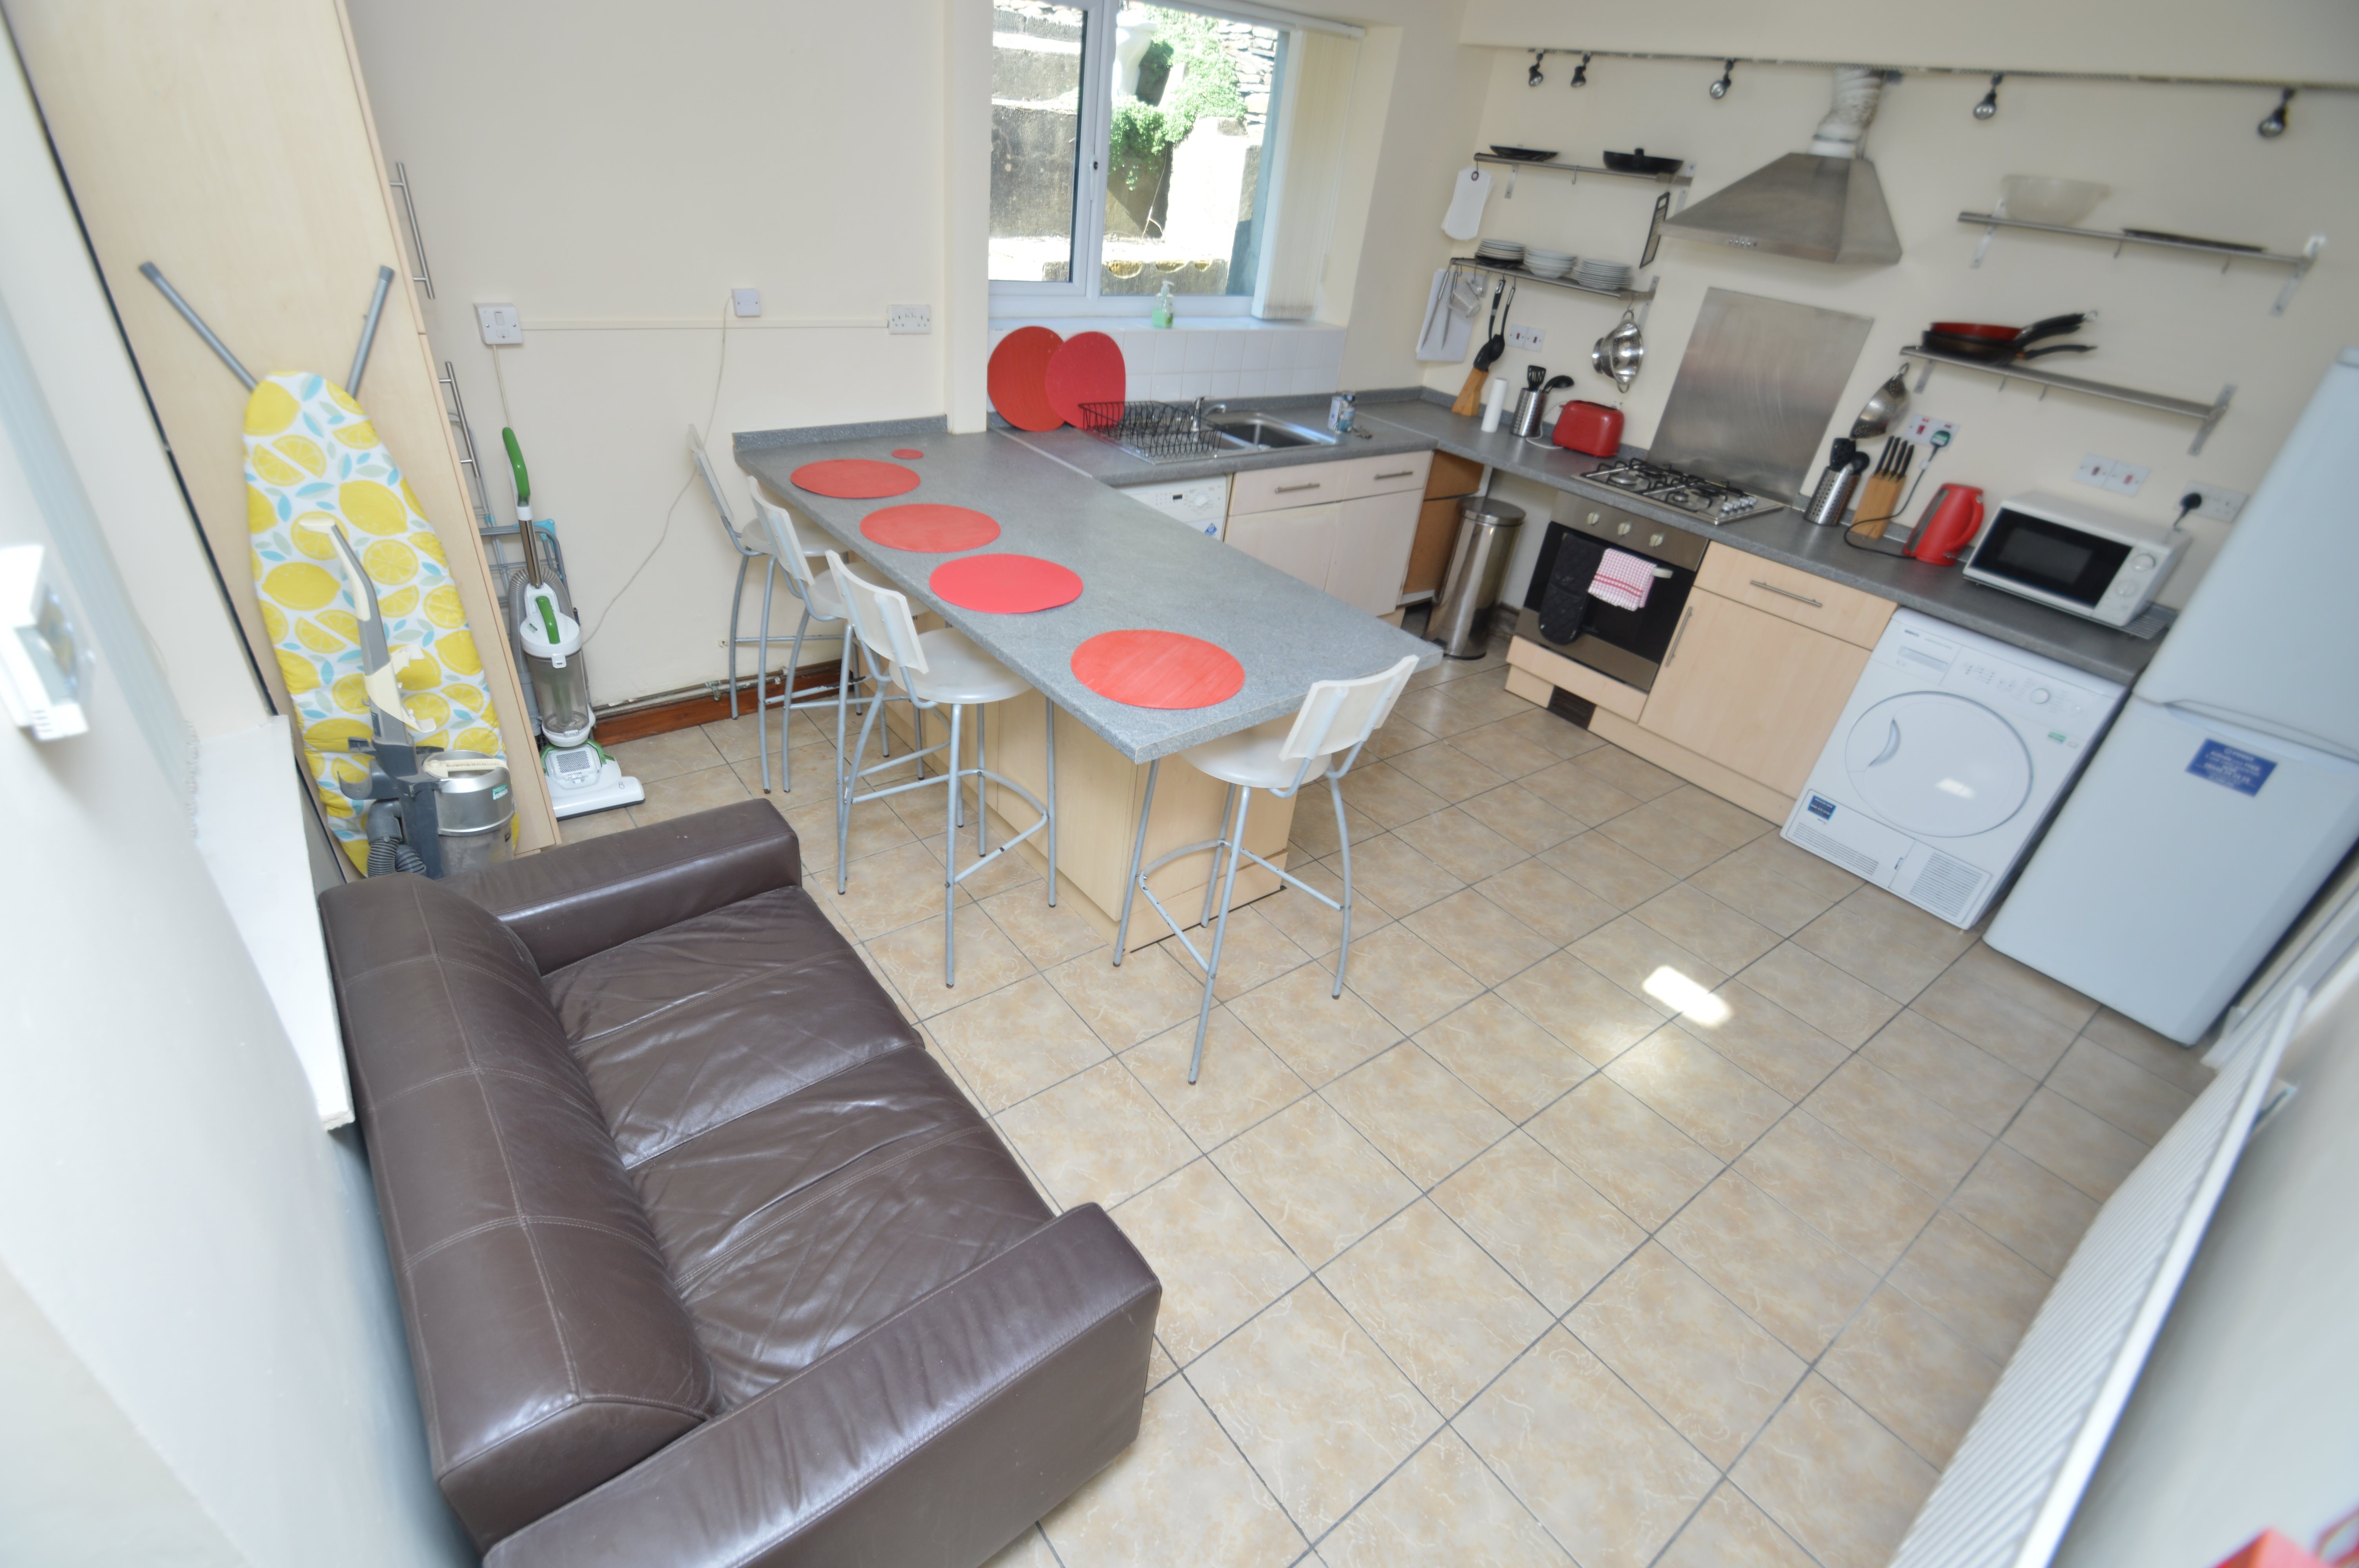 1 bed house / flat share to rent in Wood Road, Treforest  - Property Image 4